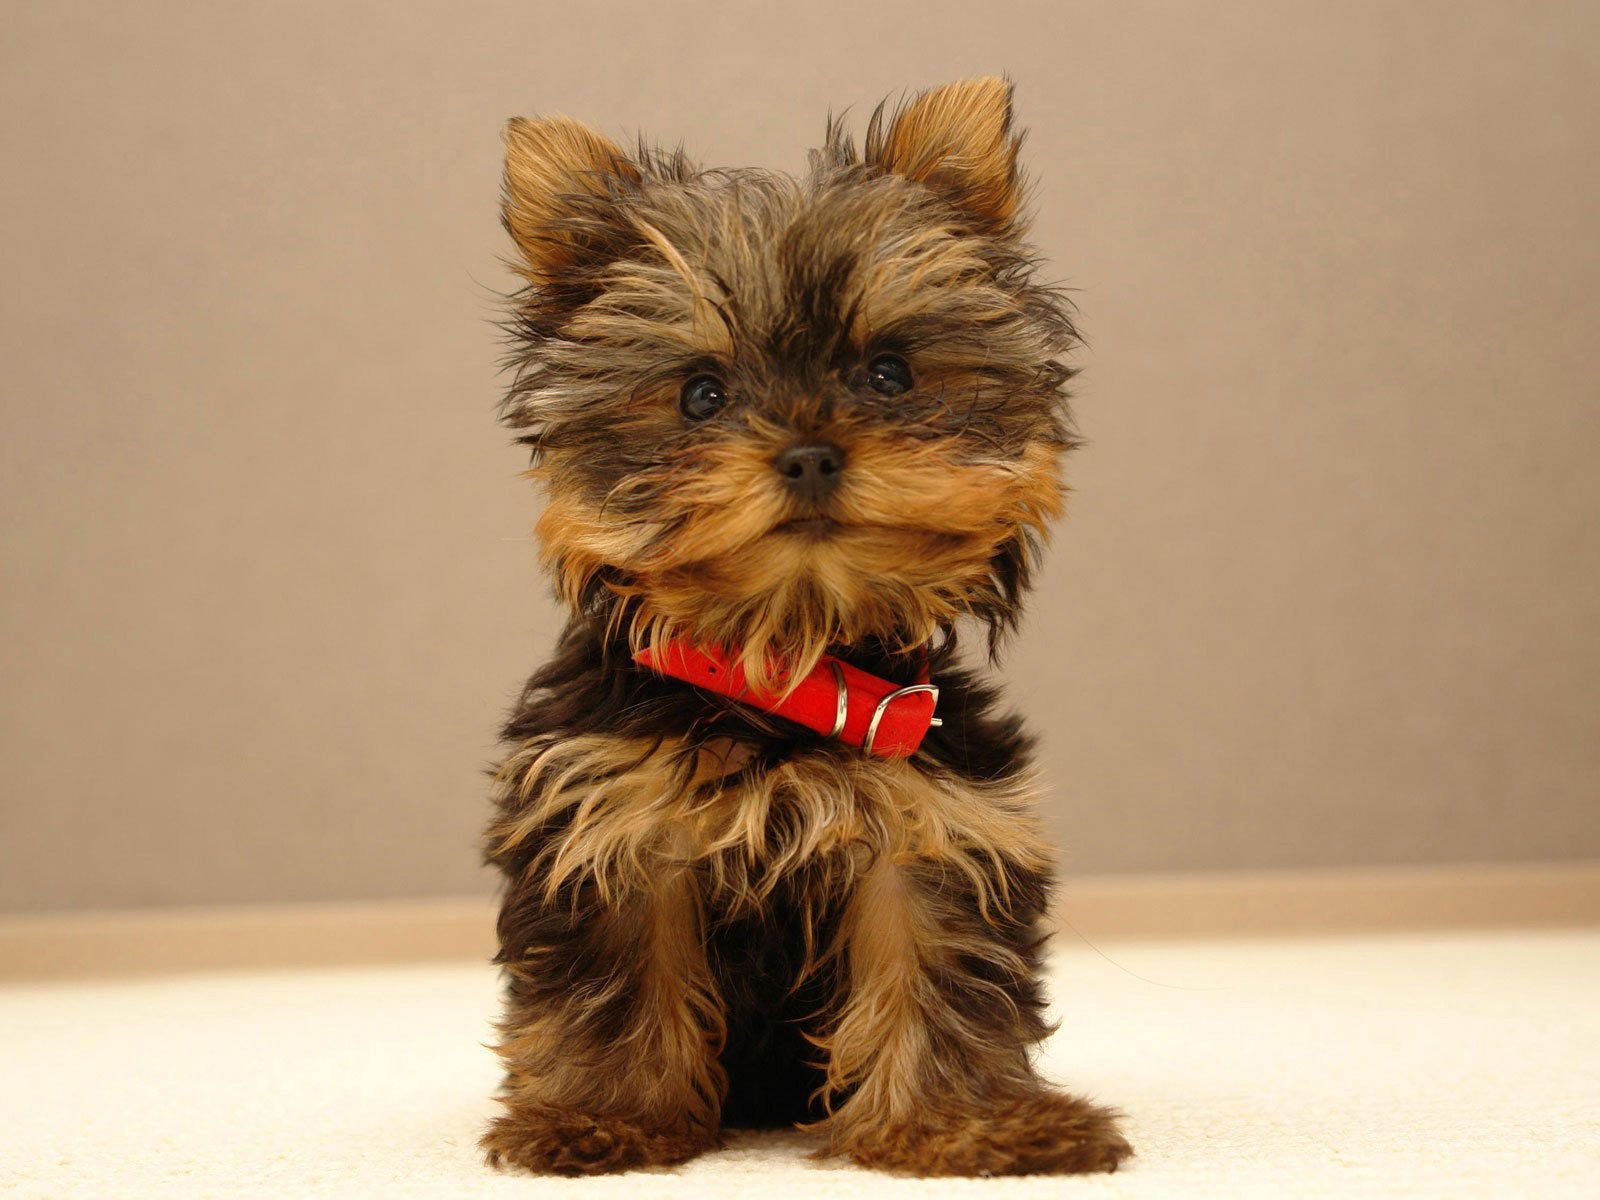 1080p HD Yorkie Wallpaper High Quality Desktop, iphone and android and Wallpaper. Animals Wa. Cute puppy wallpaper, Cute small dogs, Puppy wallpaper